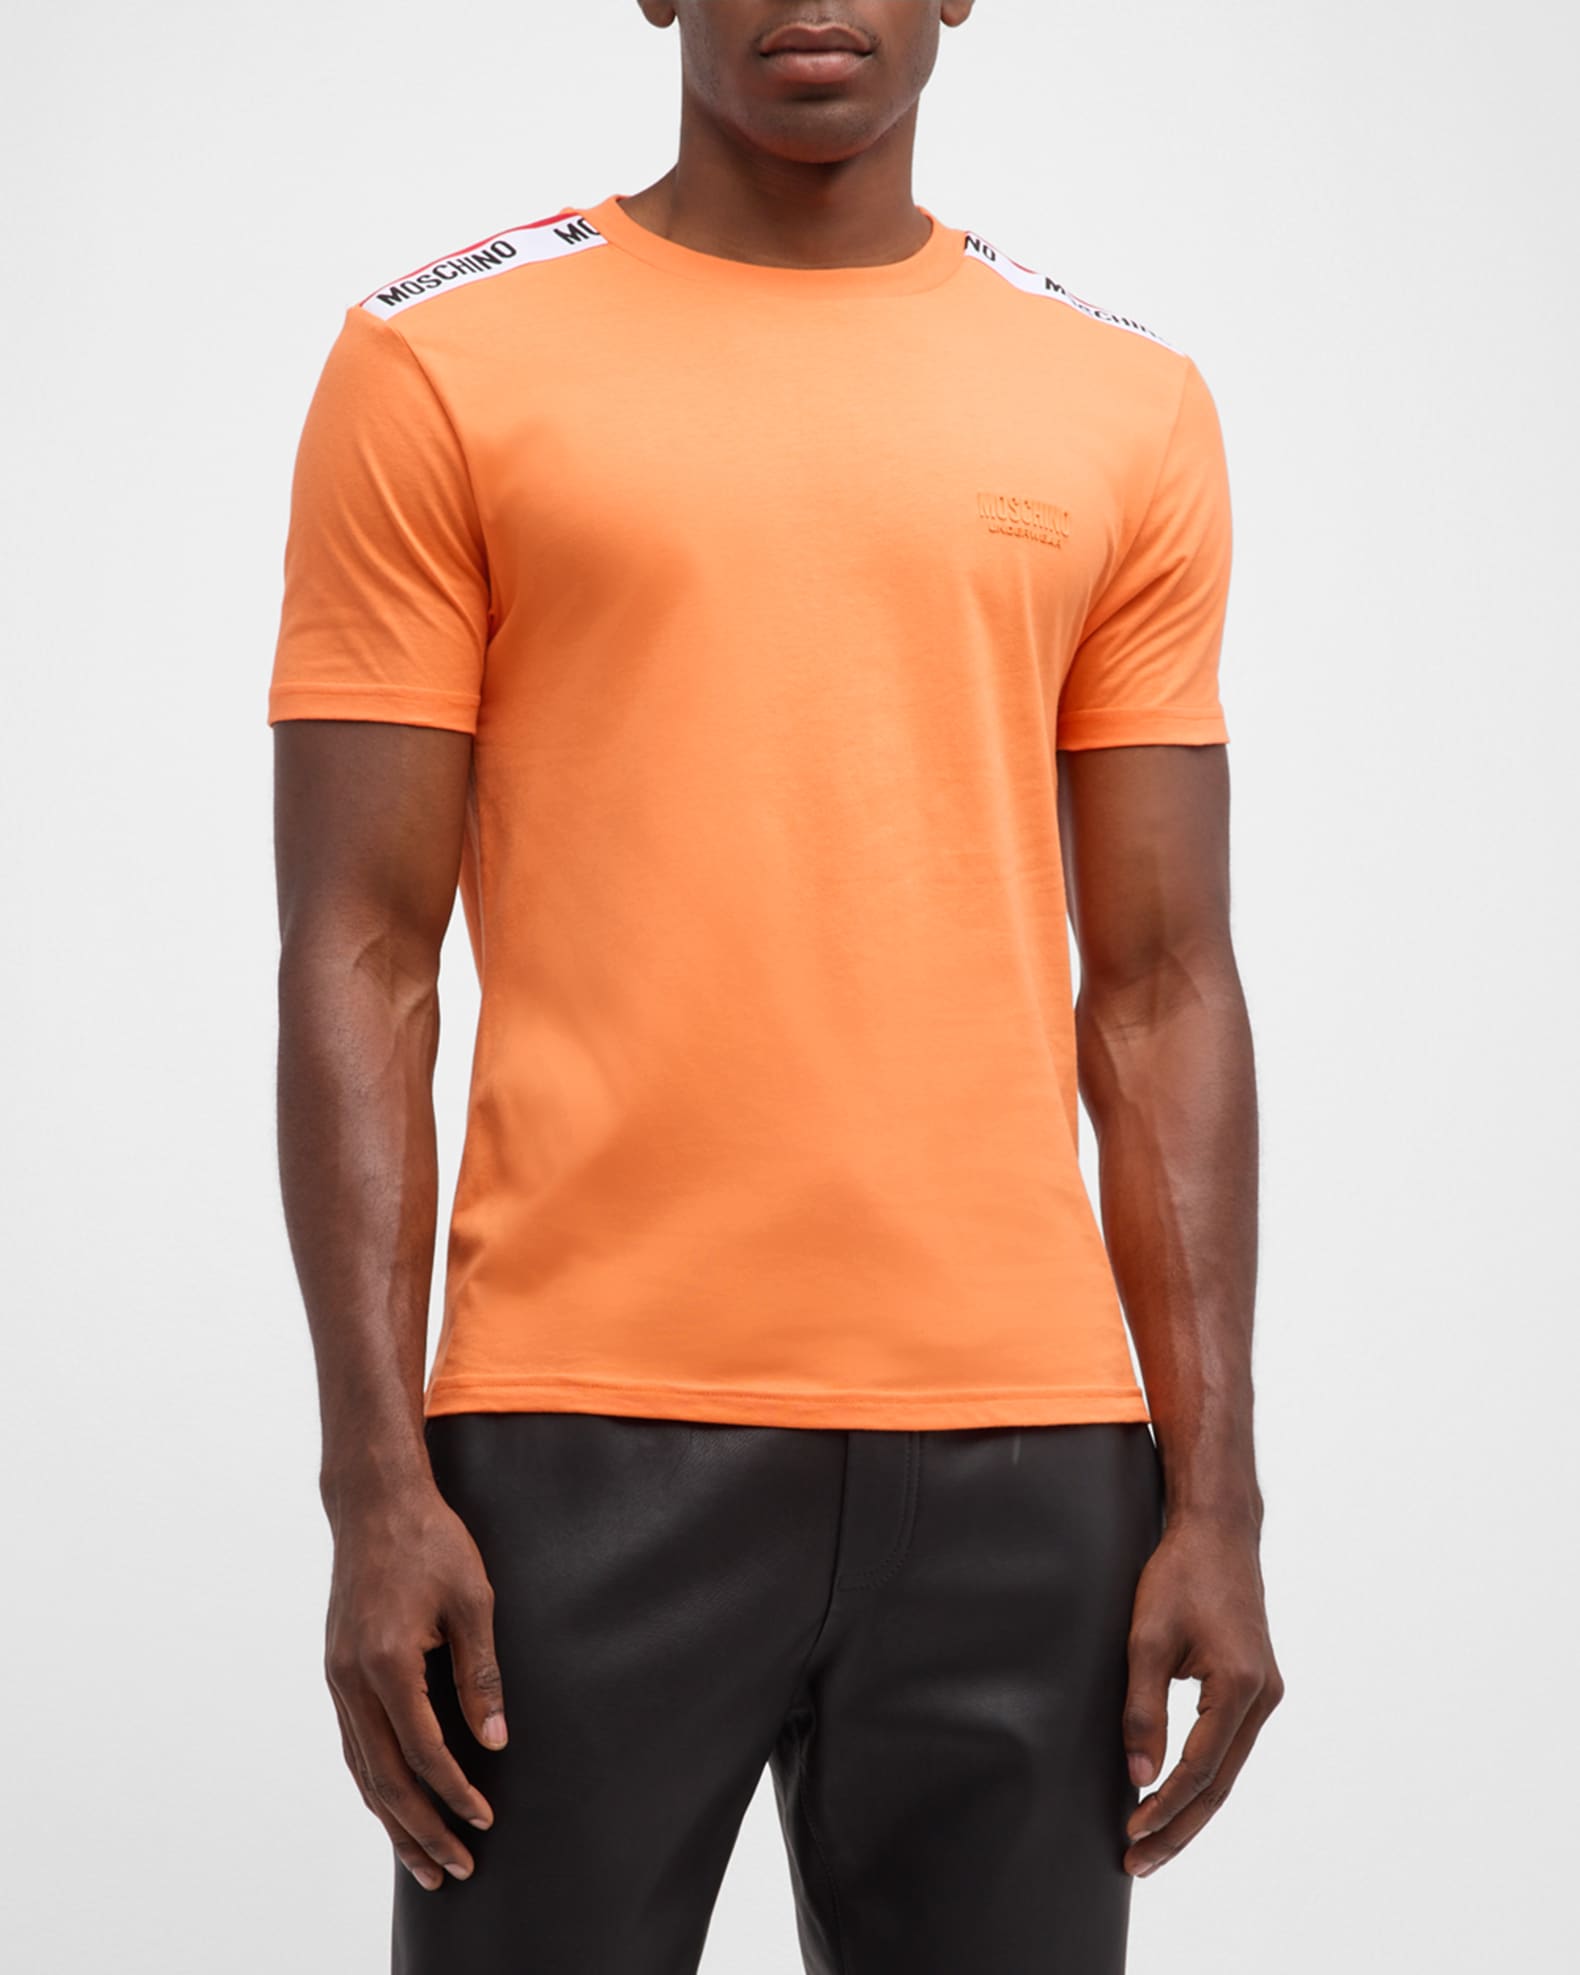 Moschino Men's T-Shirt with Shoulder Taping | Neiman Marcus